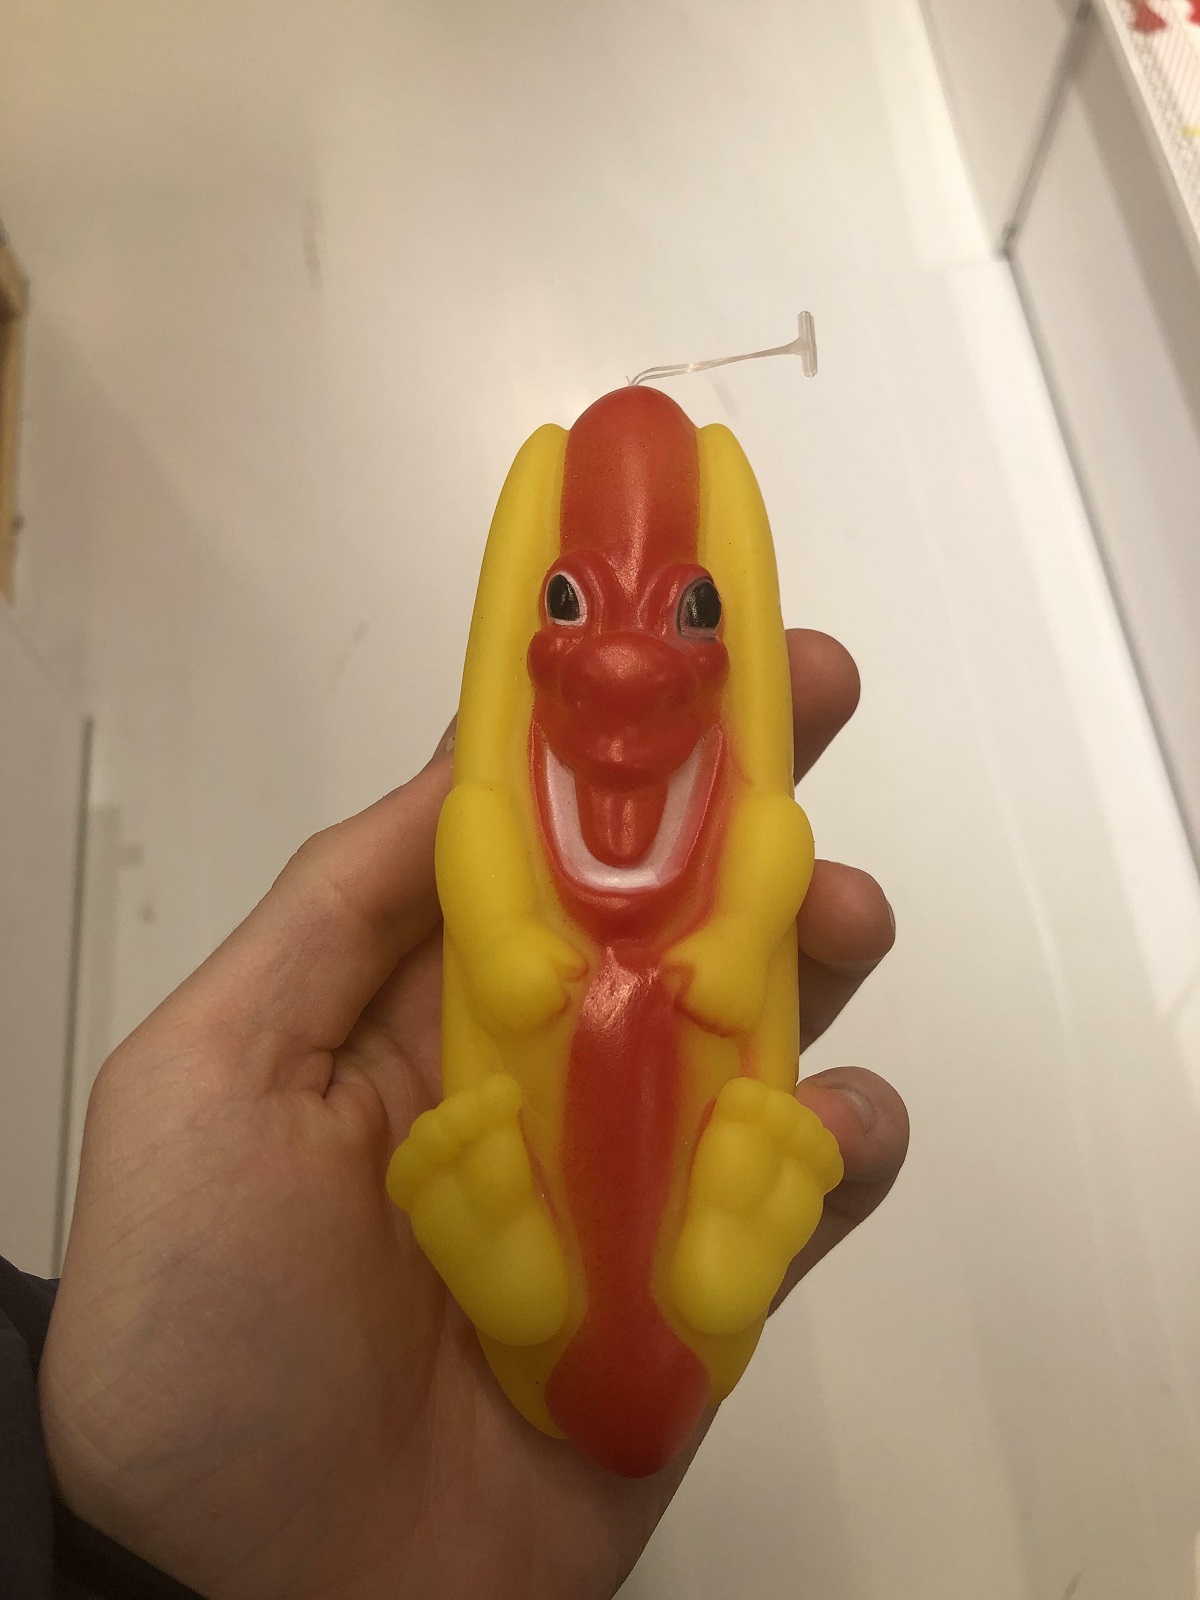 This Dog Toy